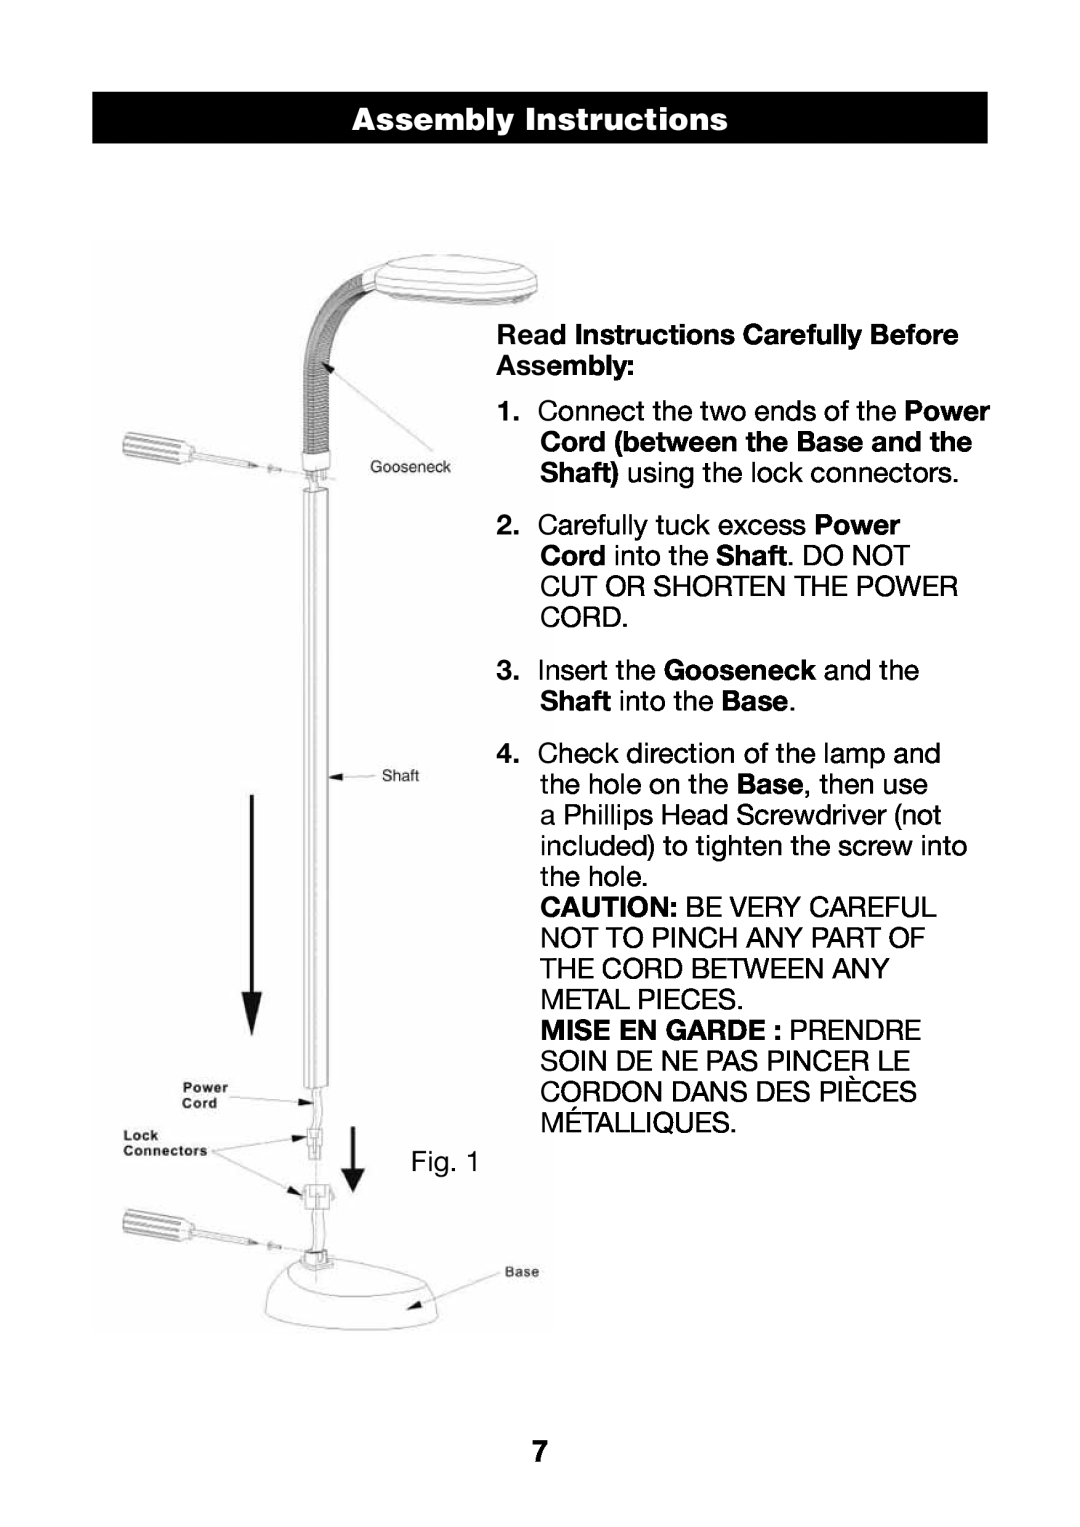 Verilux PL04 manual AssemblyHEADERInstructions, Read Instructions Carefully Before Assembly 